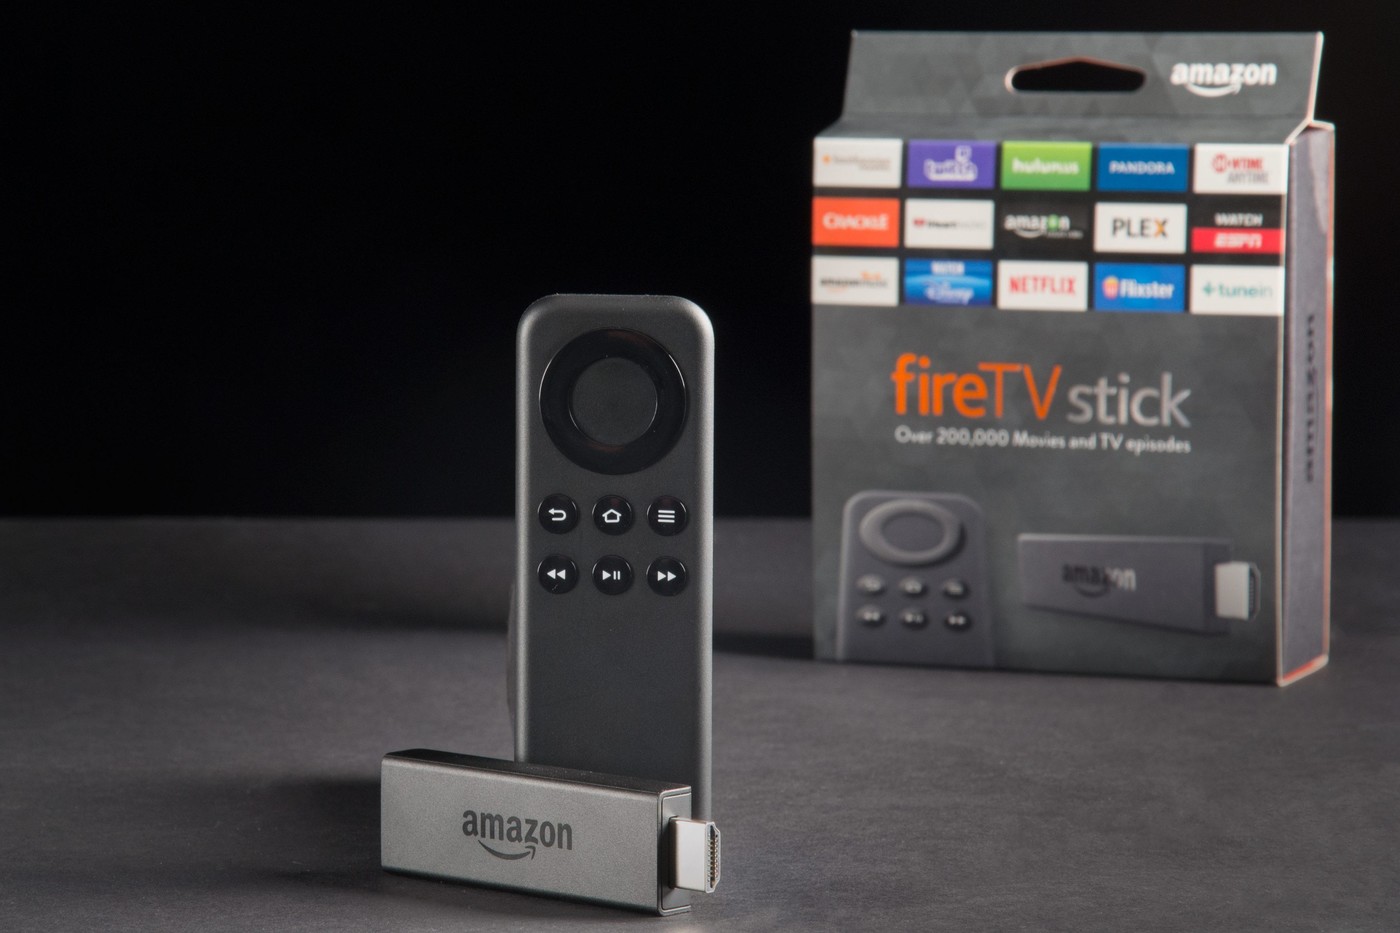 tell me about amazon fire stick